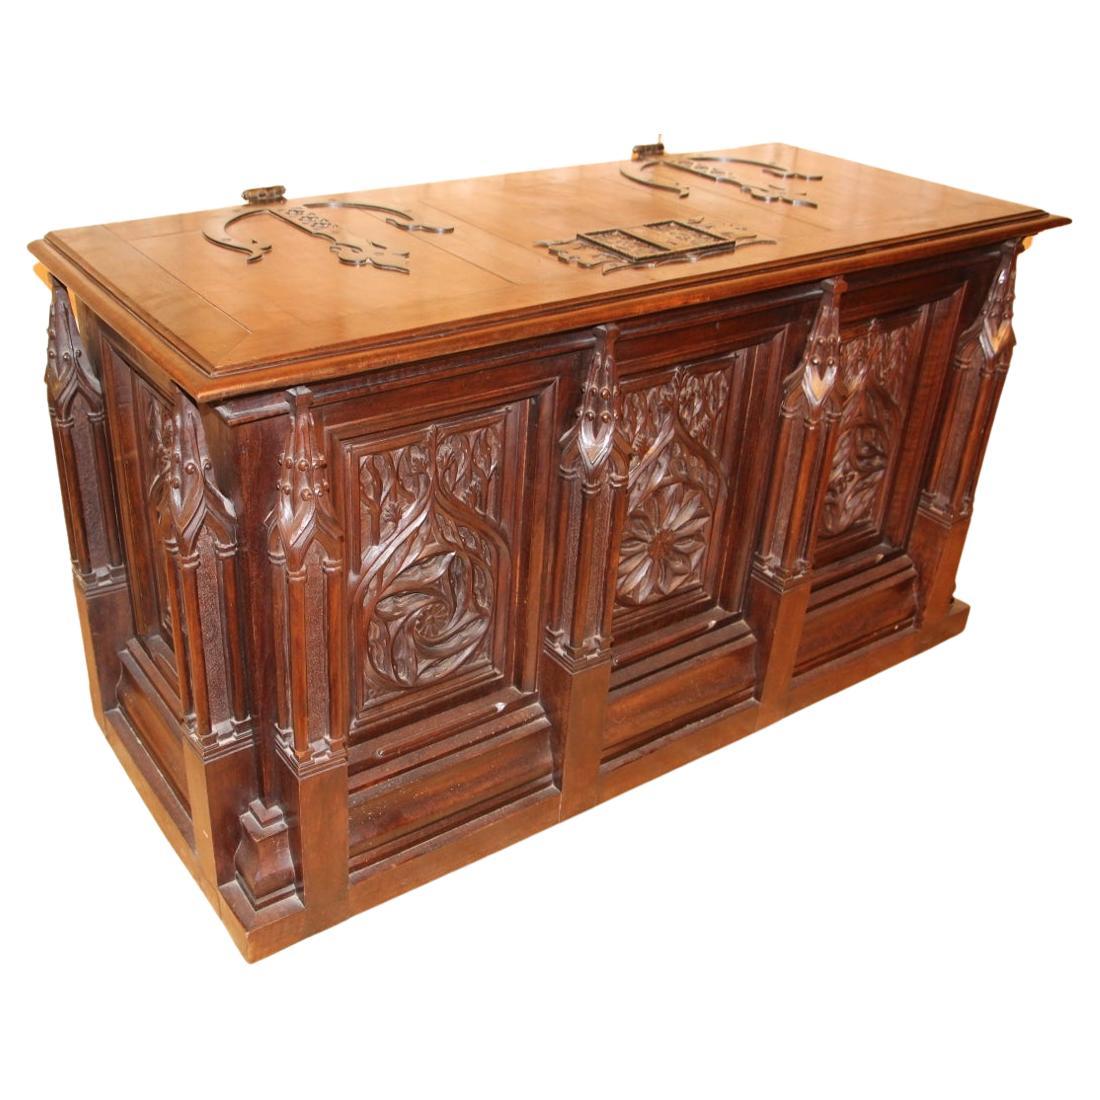 19th Century Neo-Gothic Chest Inspired by a Model from the Museum of Decorative For Sale